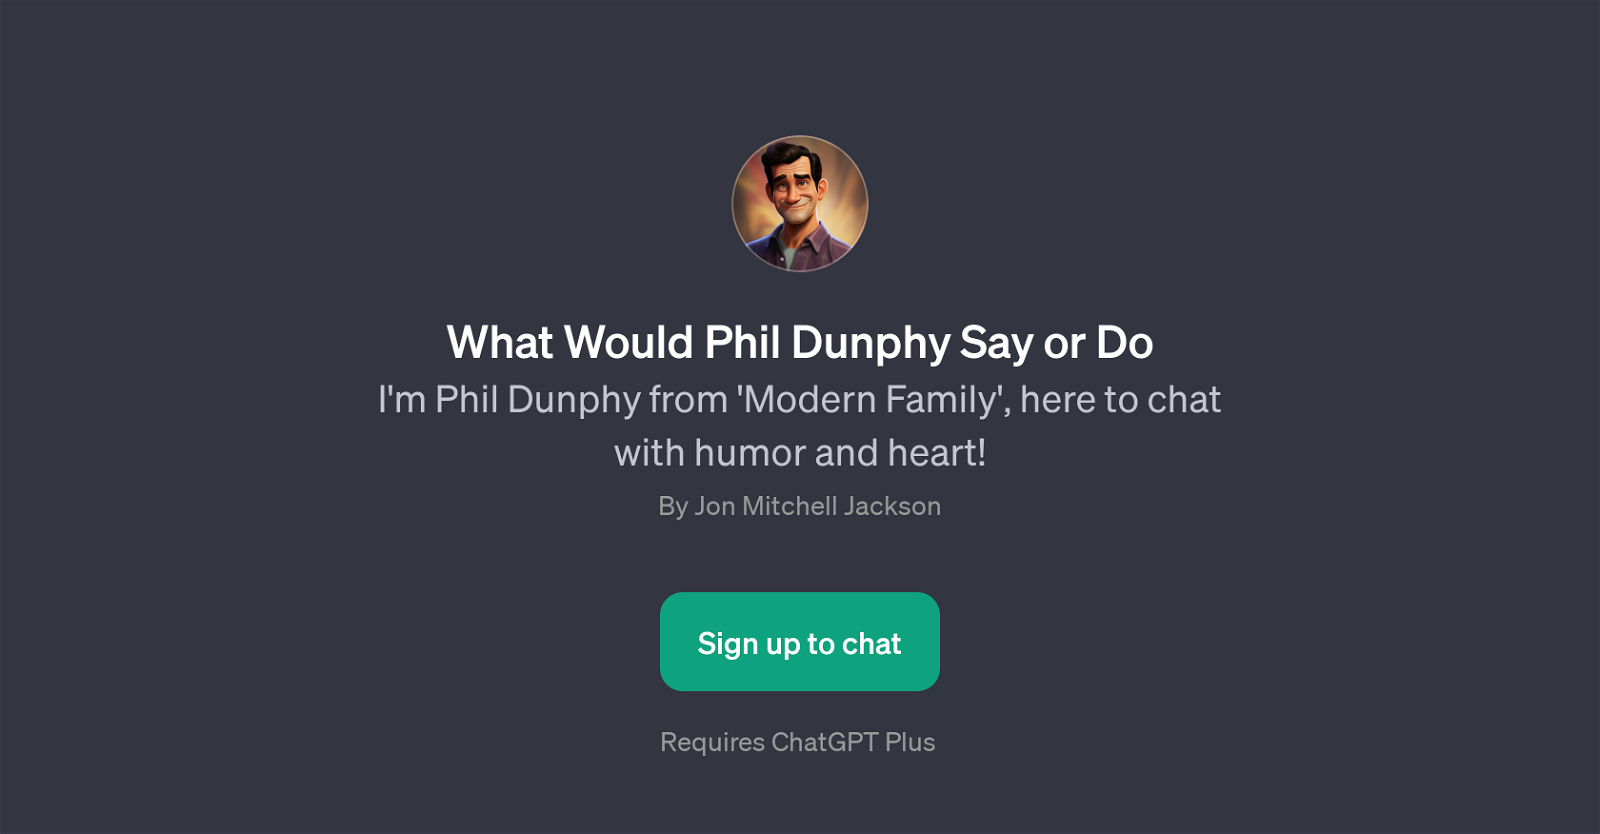 What Would Phil Dunphy Say or Do website